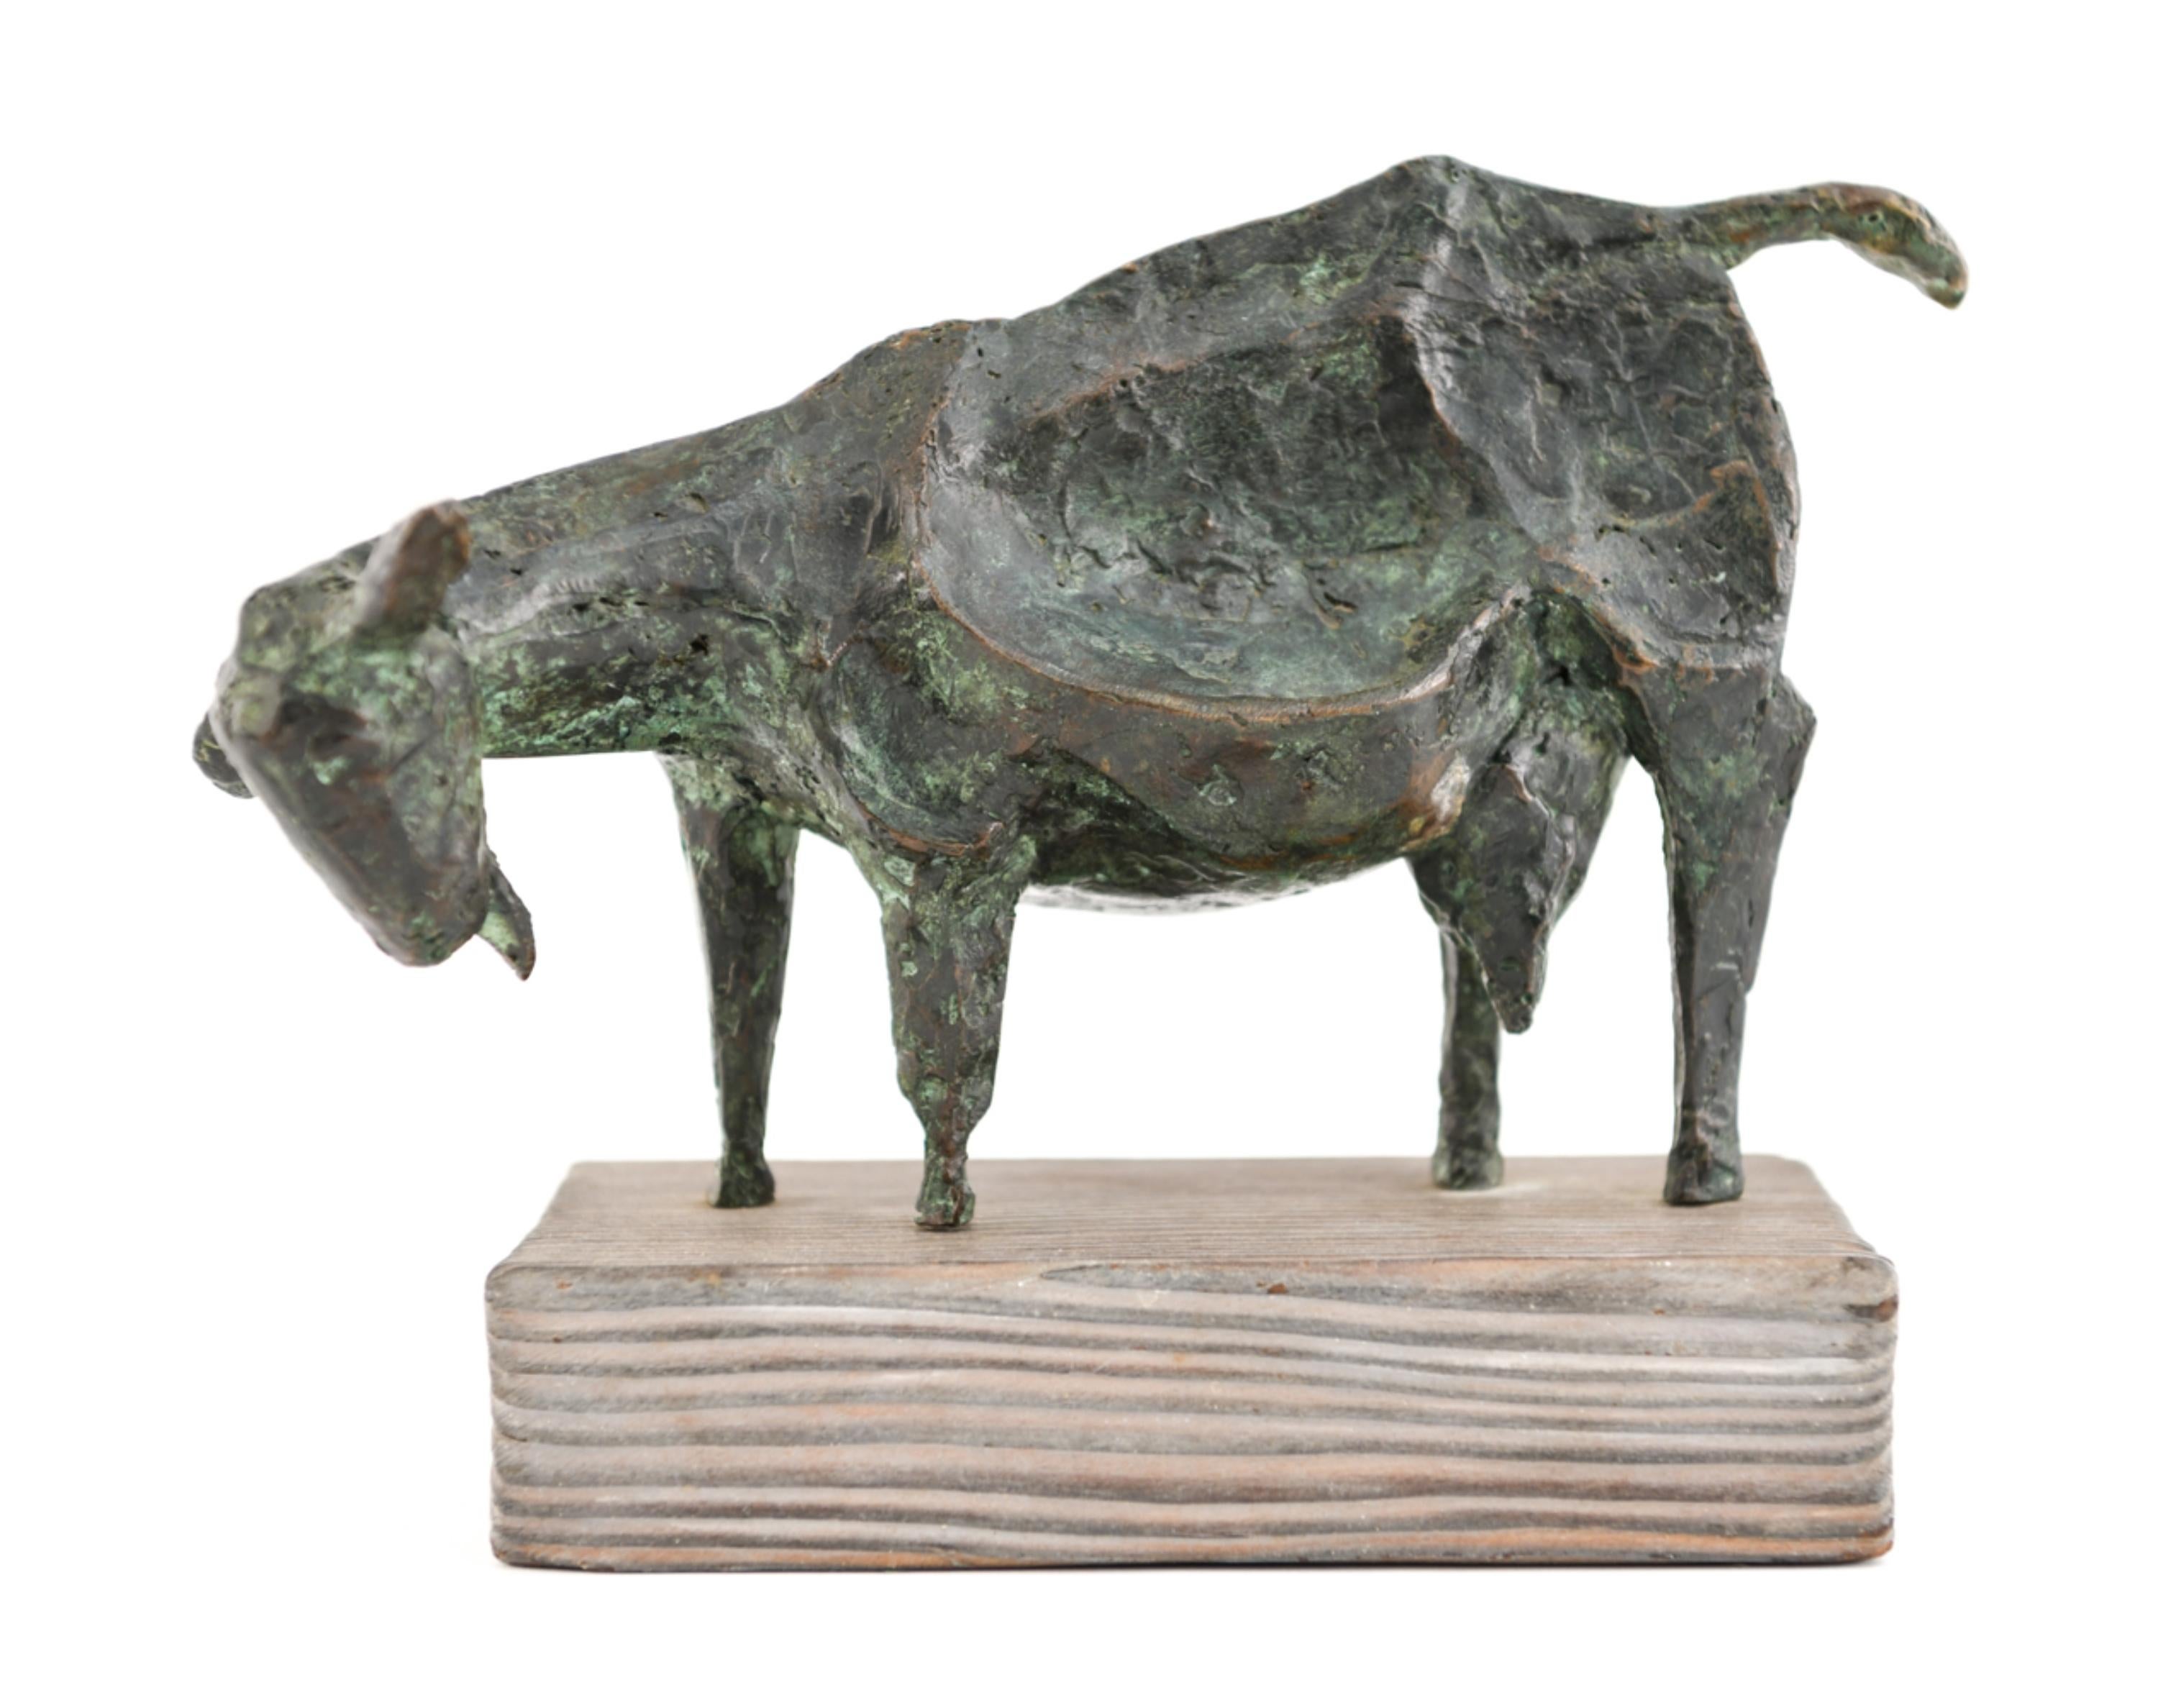 A patinated bronze brutalist sculpture of a goat, by American artist Priscilla Pattison (1919-2013). Signed to back. This brutalist goat has an interesting form and sits upon a charming, rustic wooden base. Signed on back.